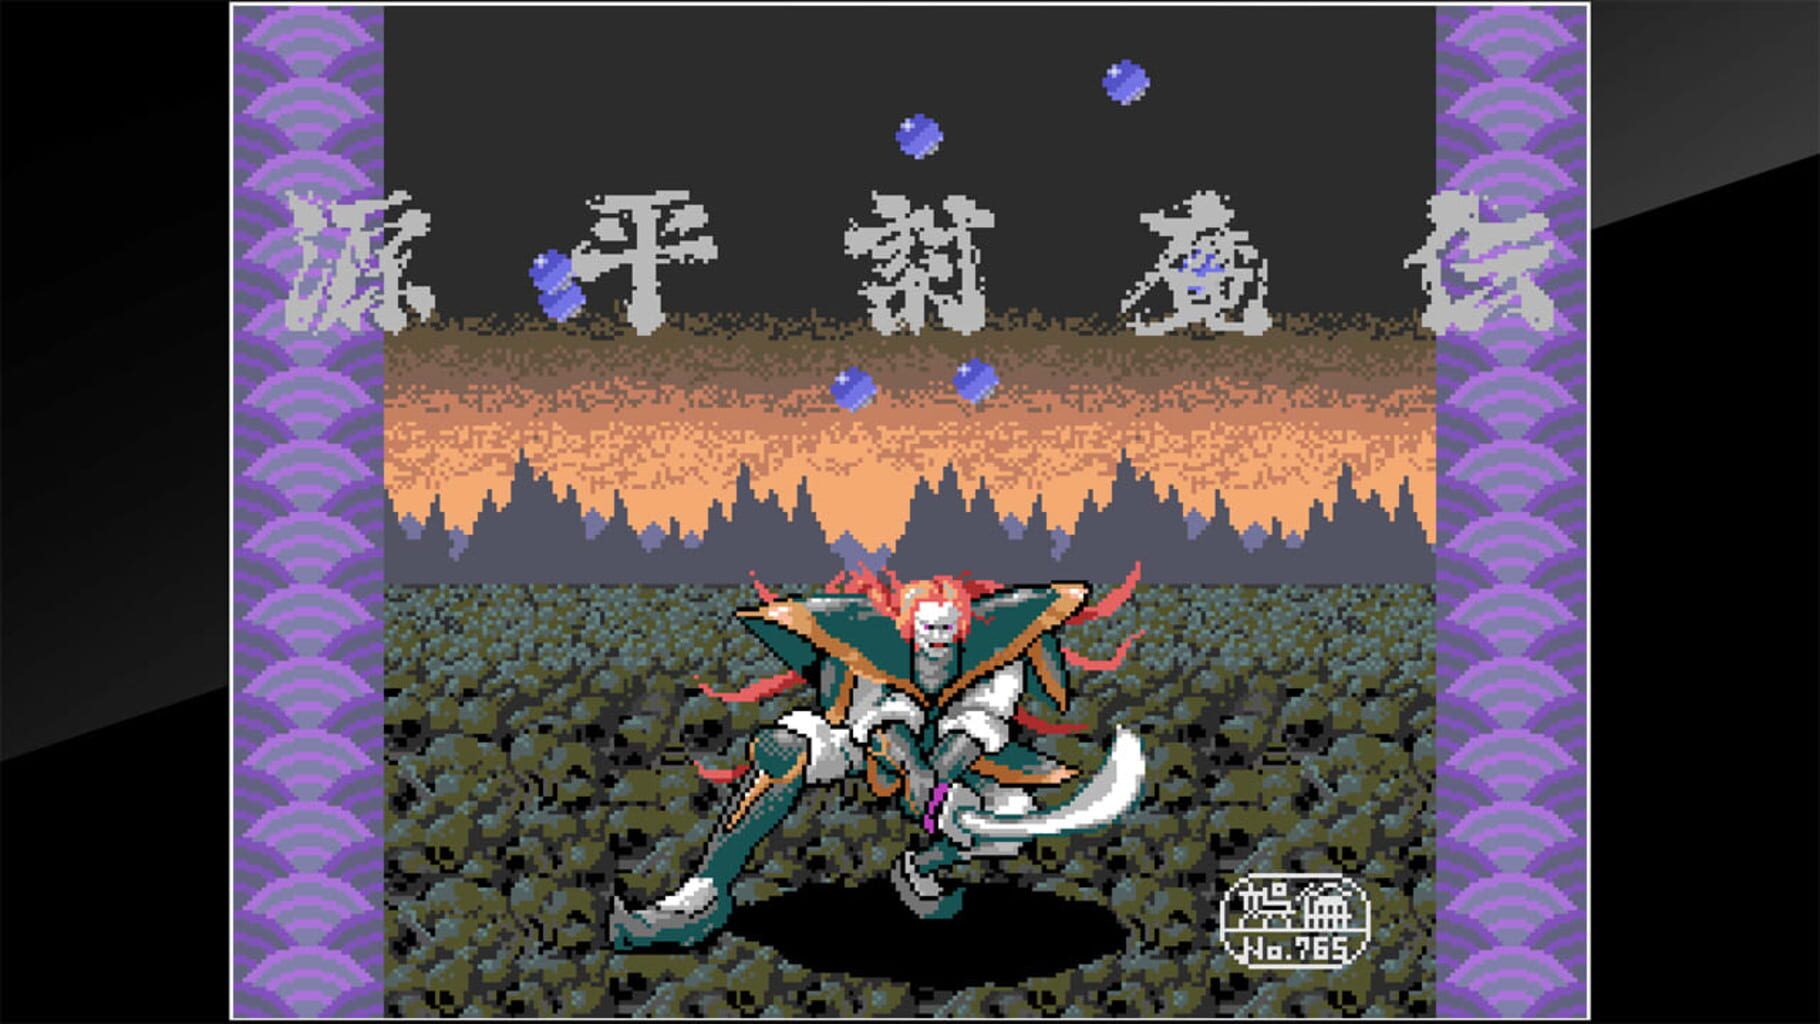 Arcade Archives: The Genji and the Heike Clans screenshot